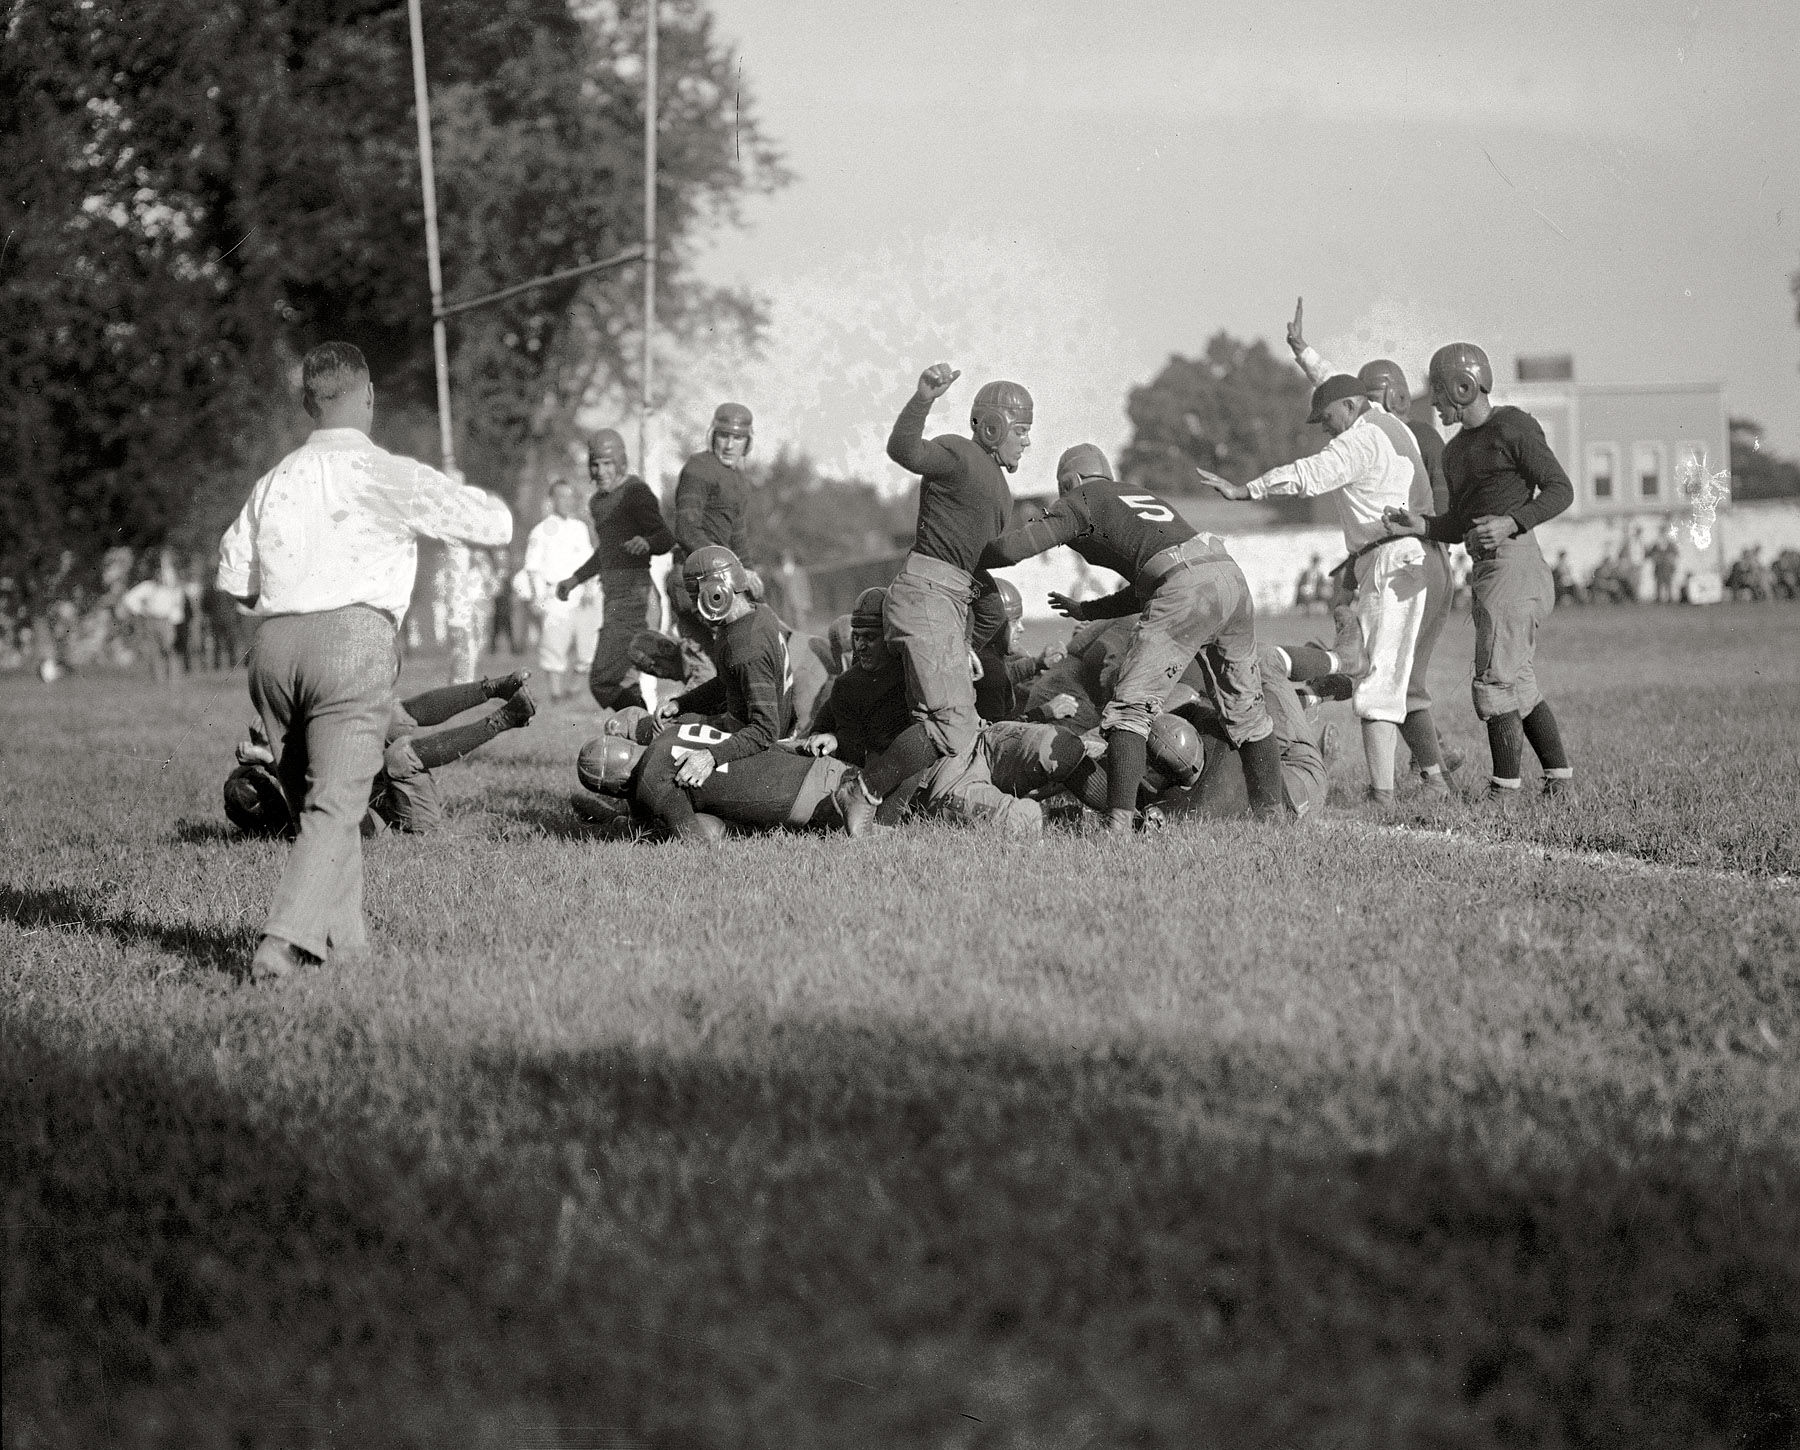 September 26, 1925. "Georgetown-Drexel Institute game." National Photo Company Collection glass negative. View full size.